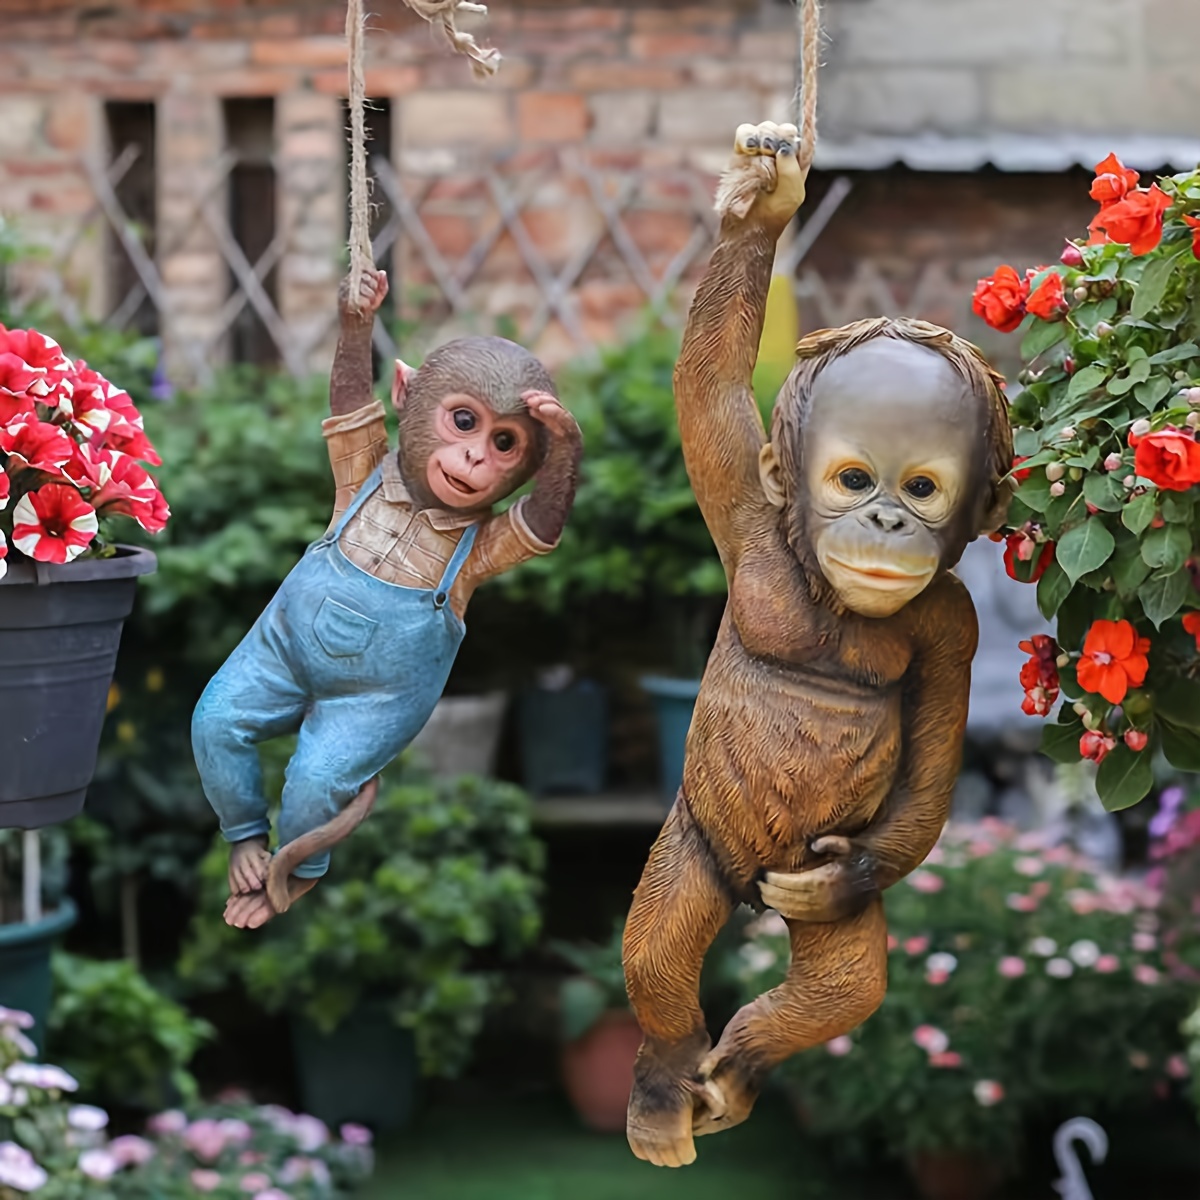 

1pc, Hanging Monkey Gorilla Animal Sculpture Pendant, Suitable For Yard Garden Woodland Home Animal Statue Crafts Ornaments